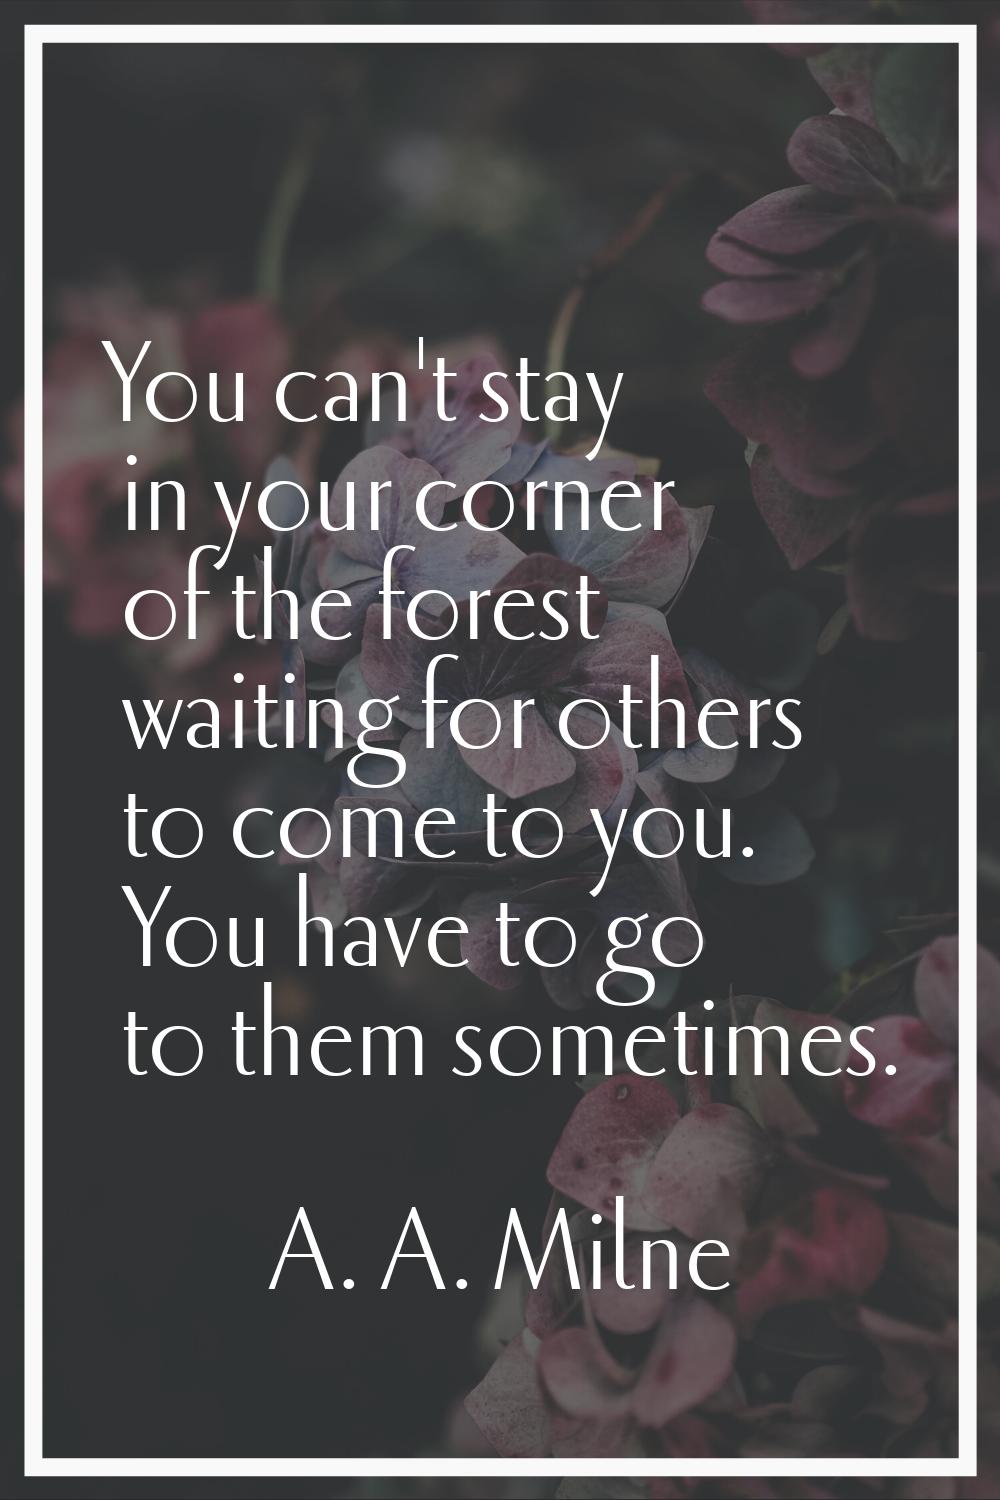 You can't stay in your corner of the forest waiting for others to come to you. You have to go to th